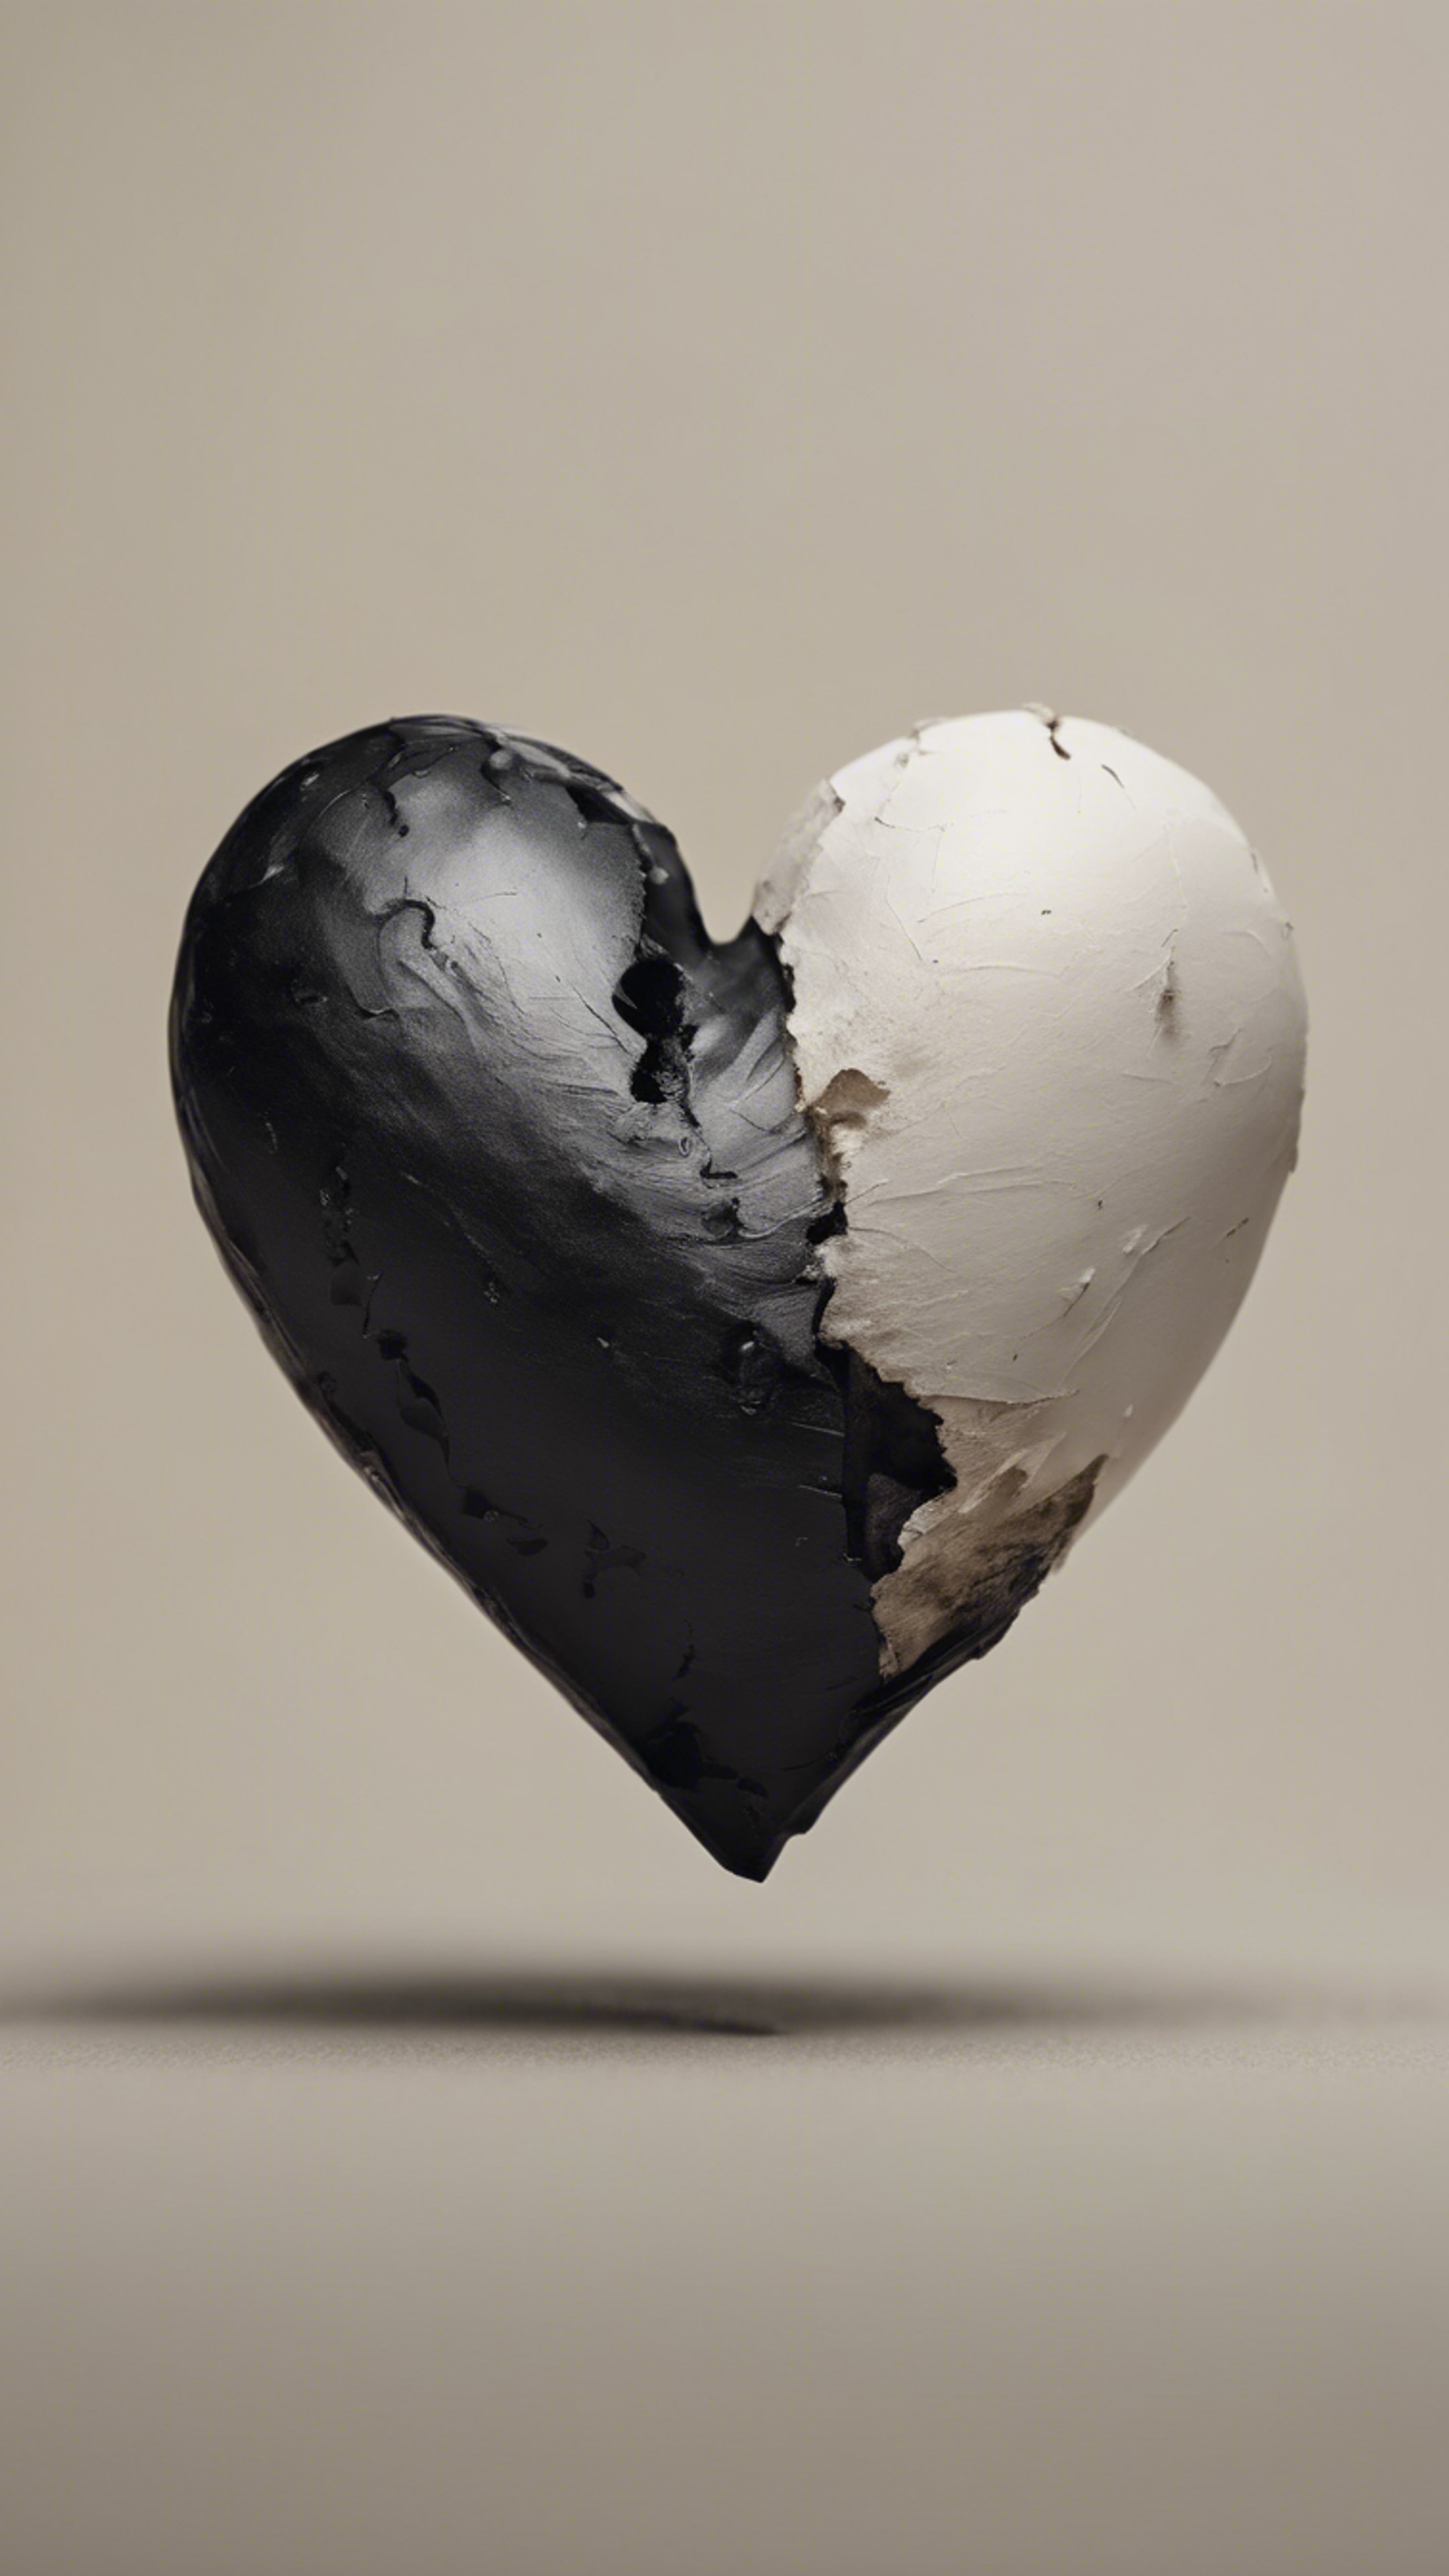 A black heart on one side and a white heart on the other side, against a neutral color background. Tapet[e1ad96bec27b409fa1a8]